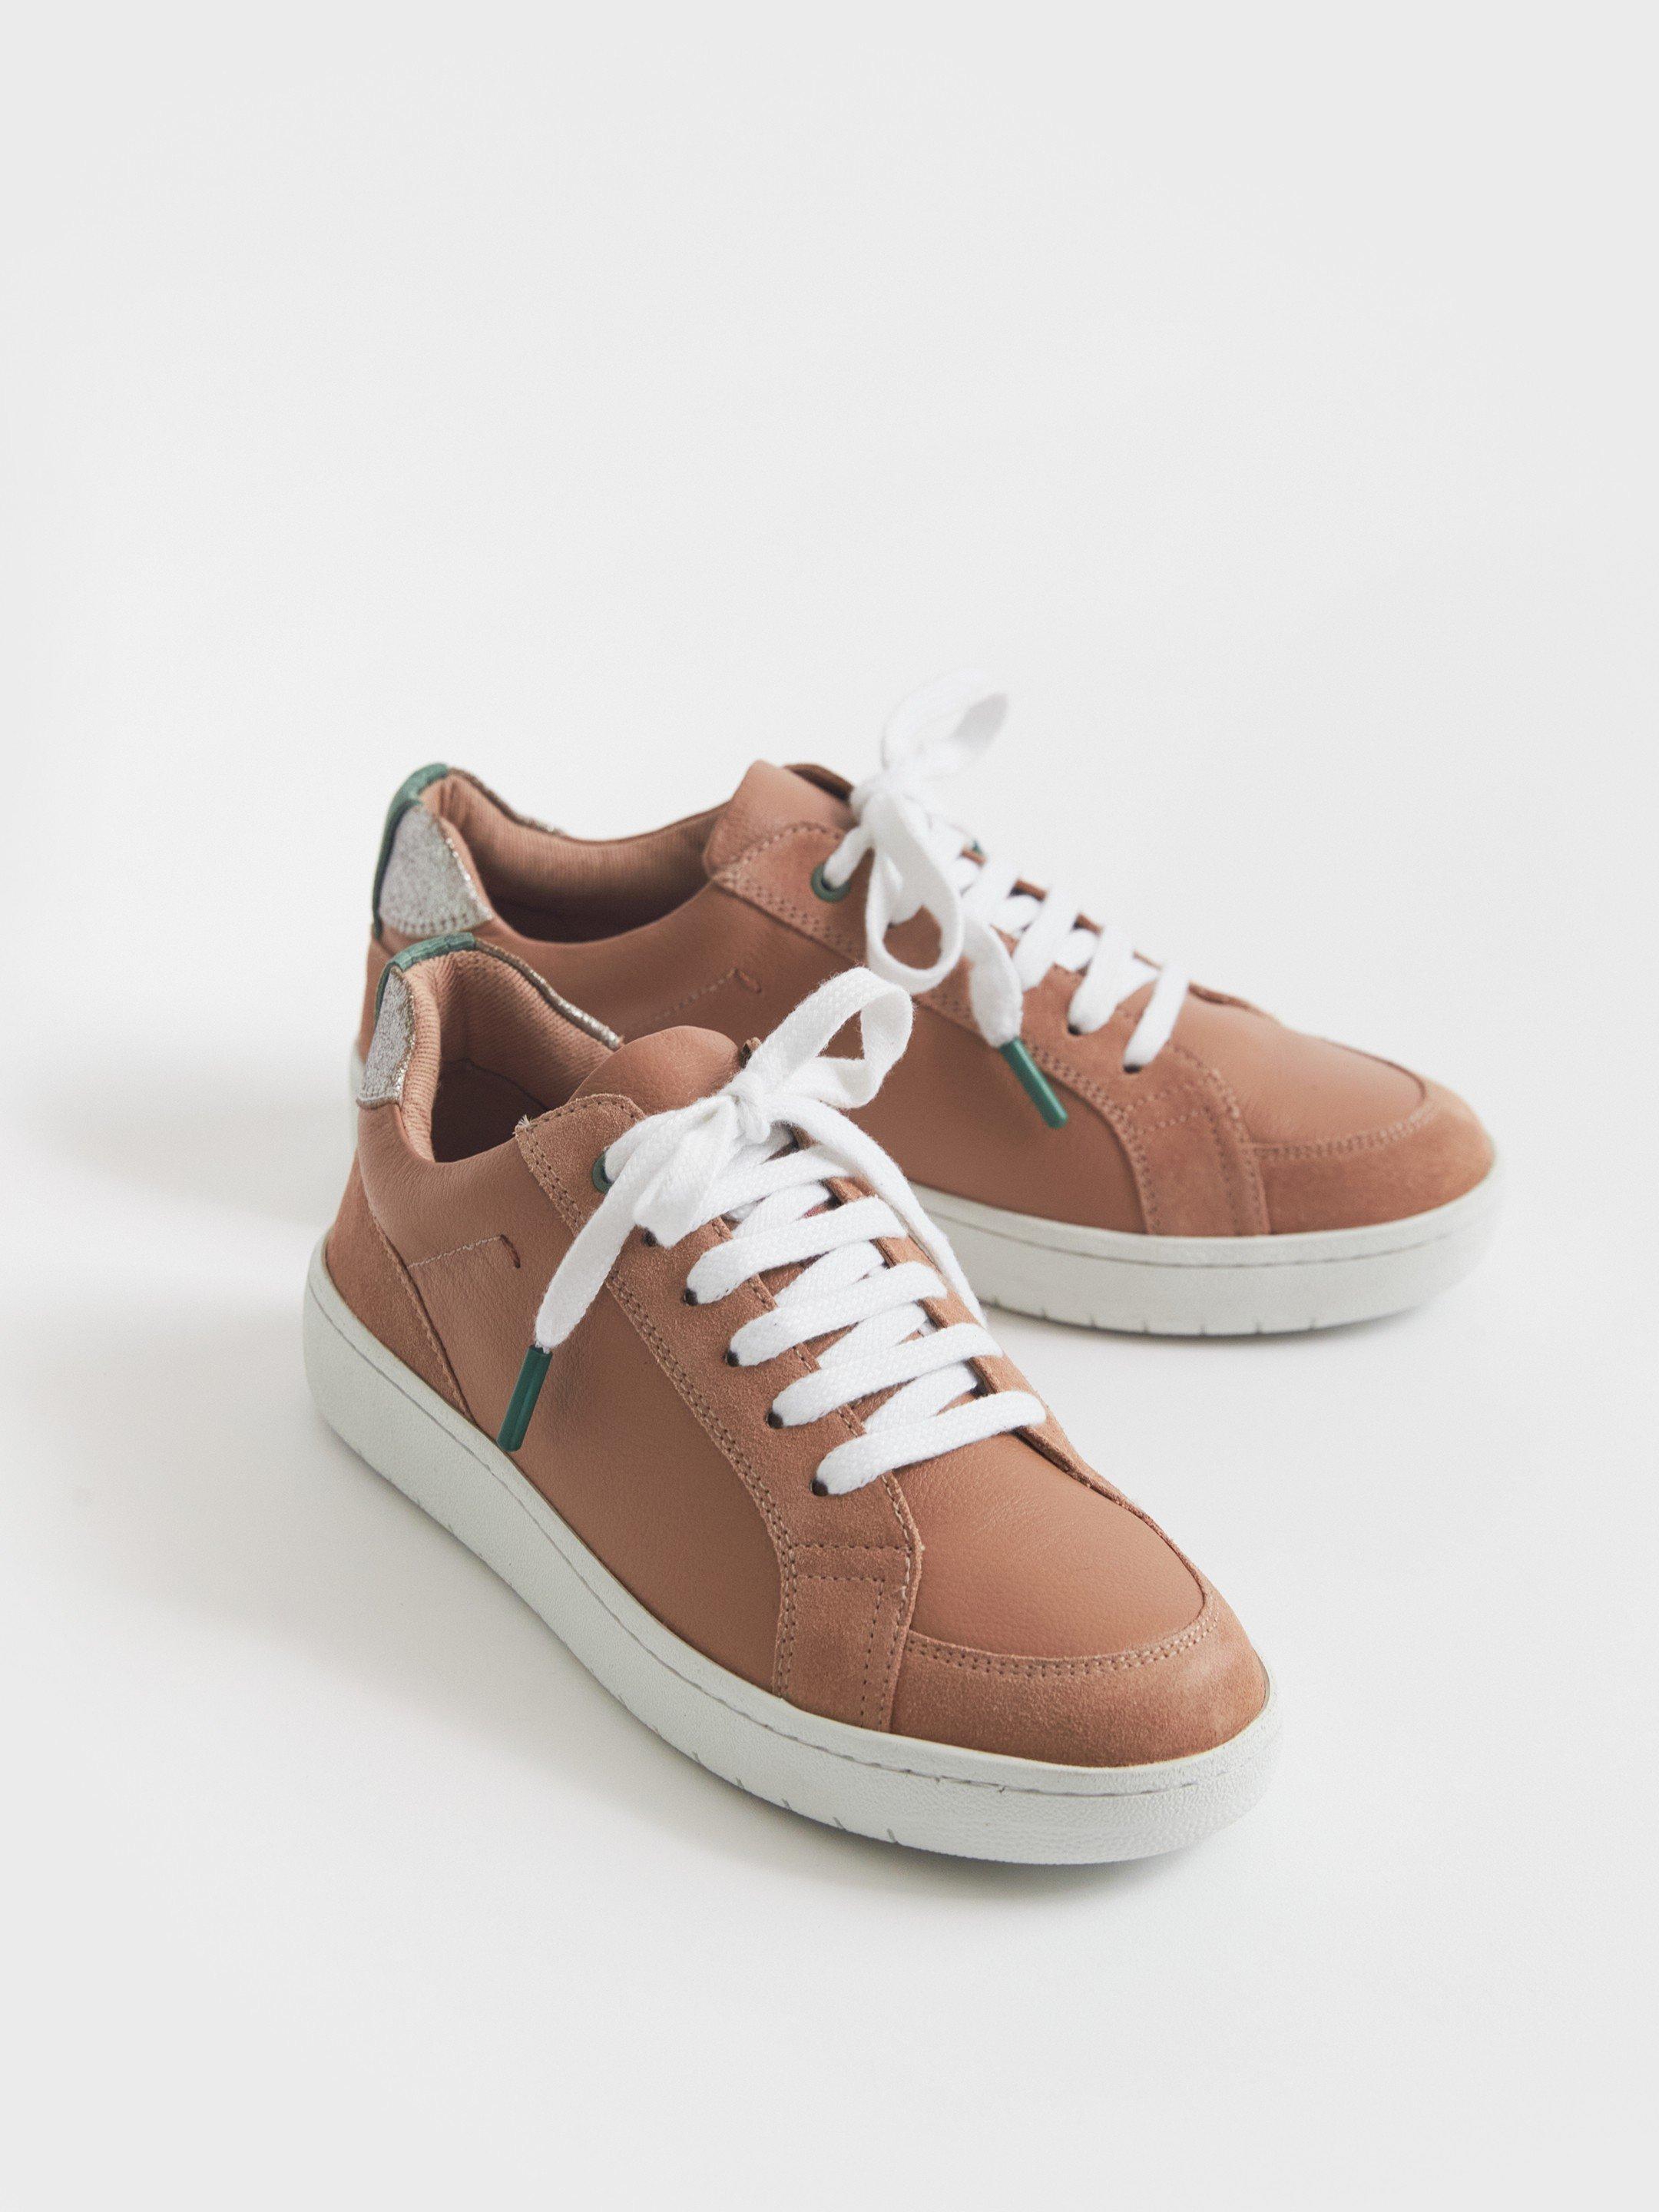 Leather Suede Trainer in LGT PINK - FLAT FRONT